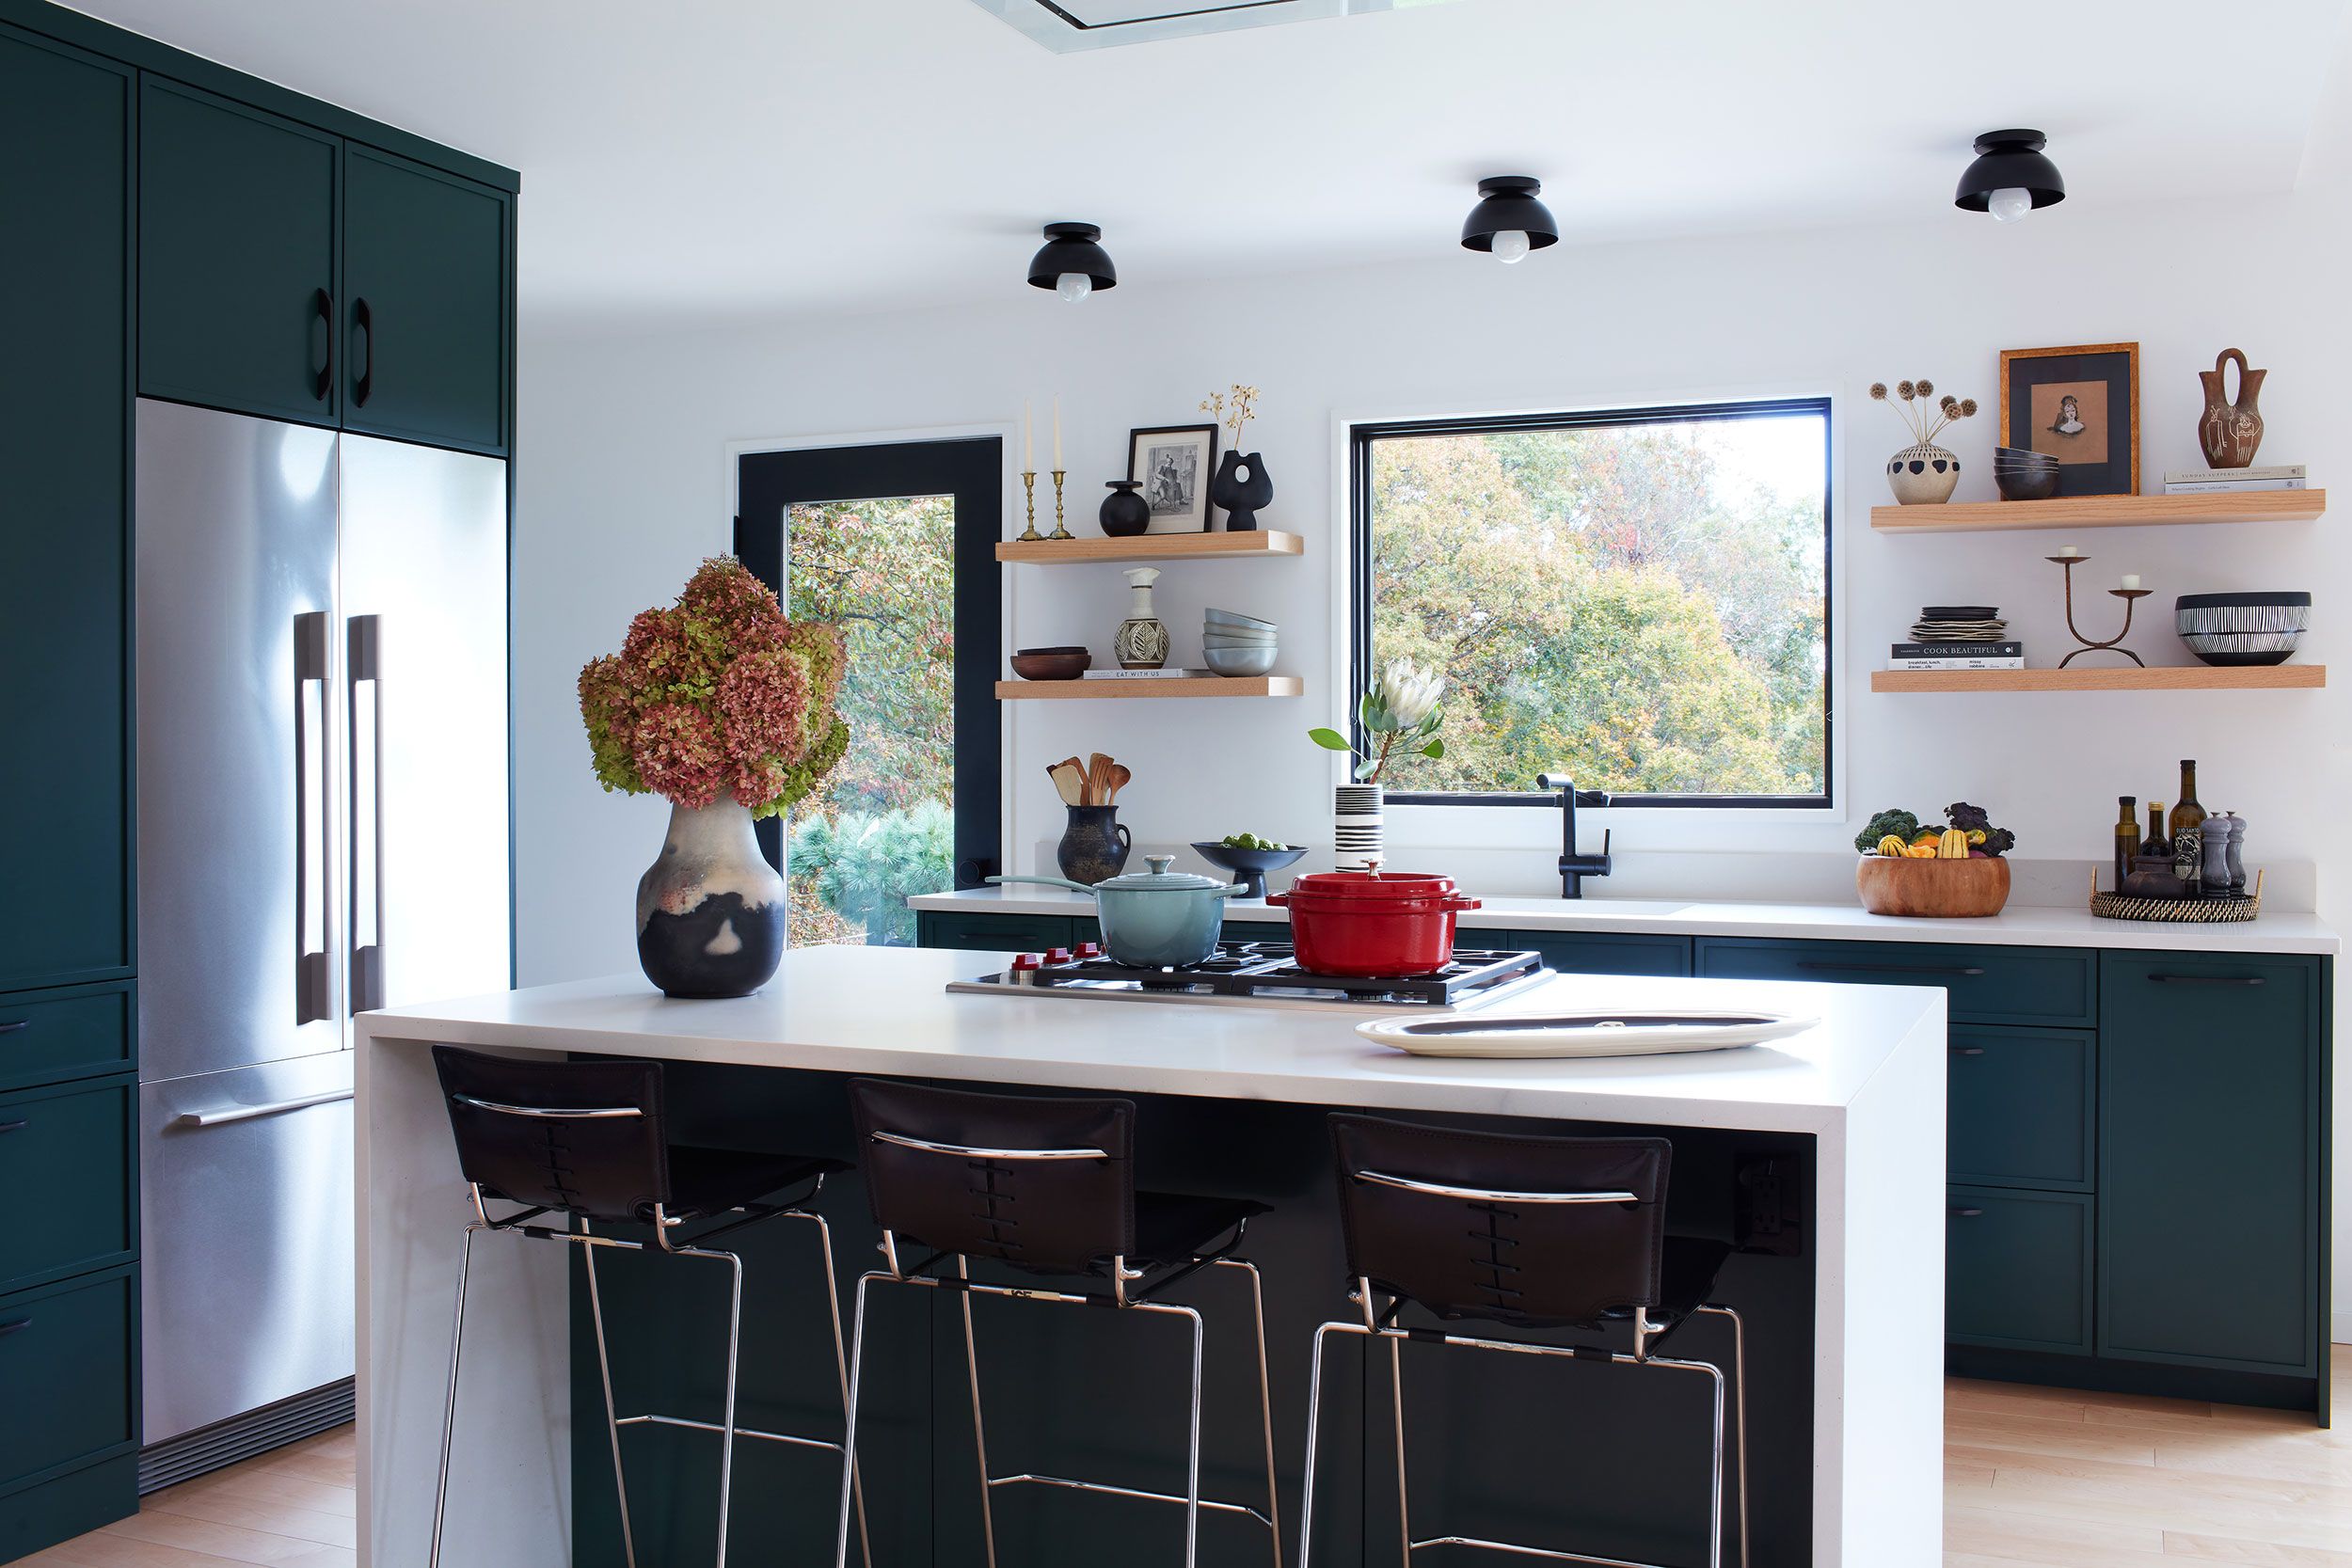 These 20 Examples Prove the Versatility of Green Kitchen Cabinets